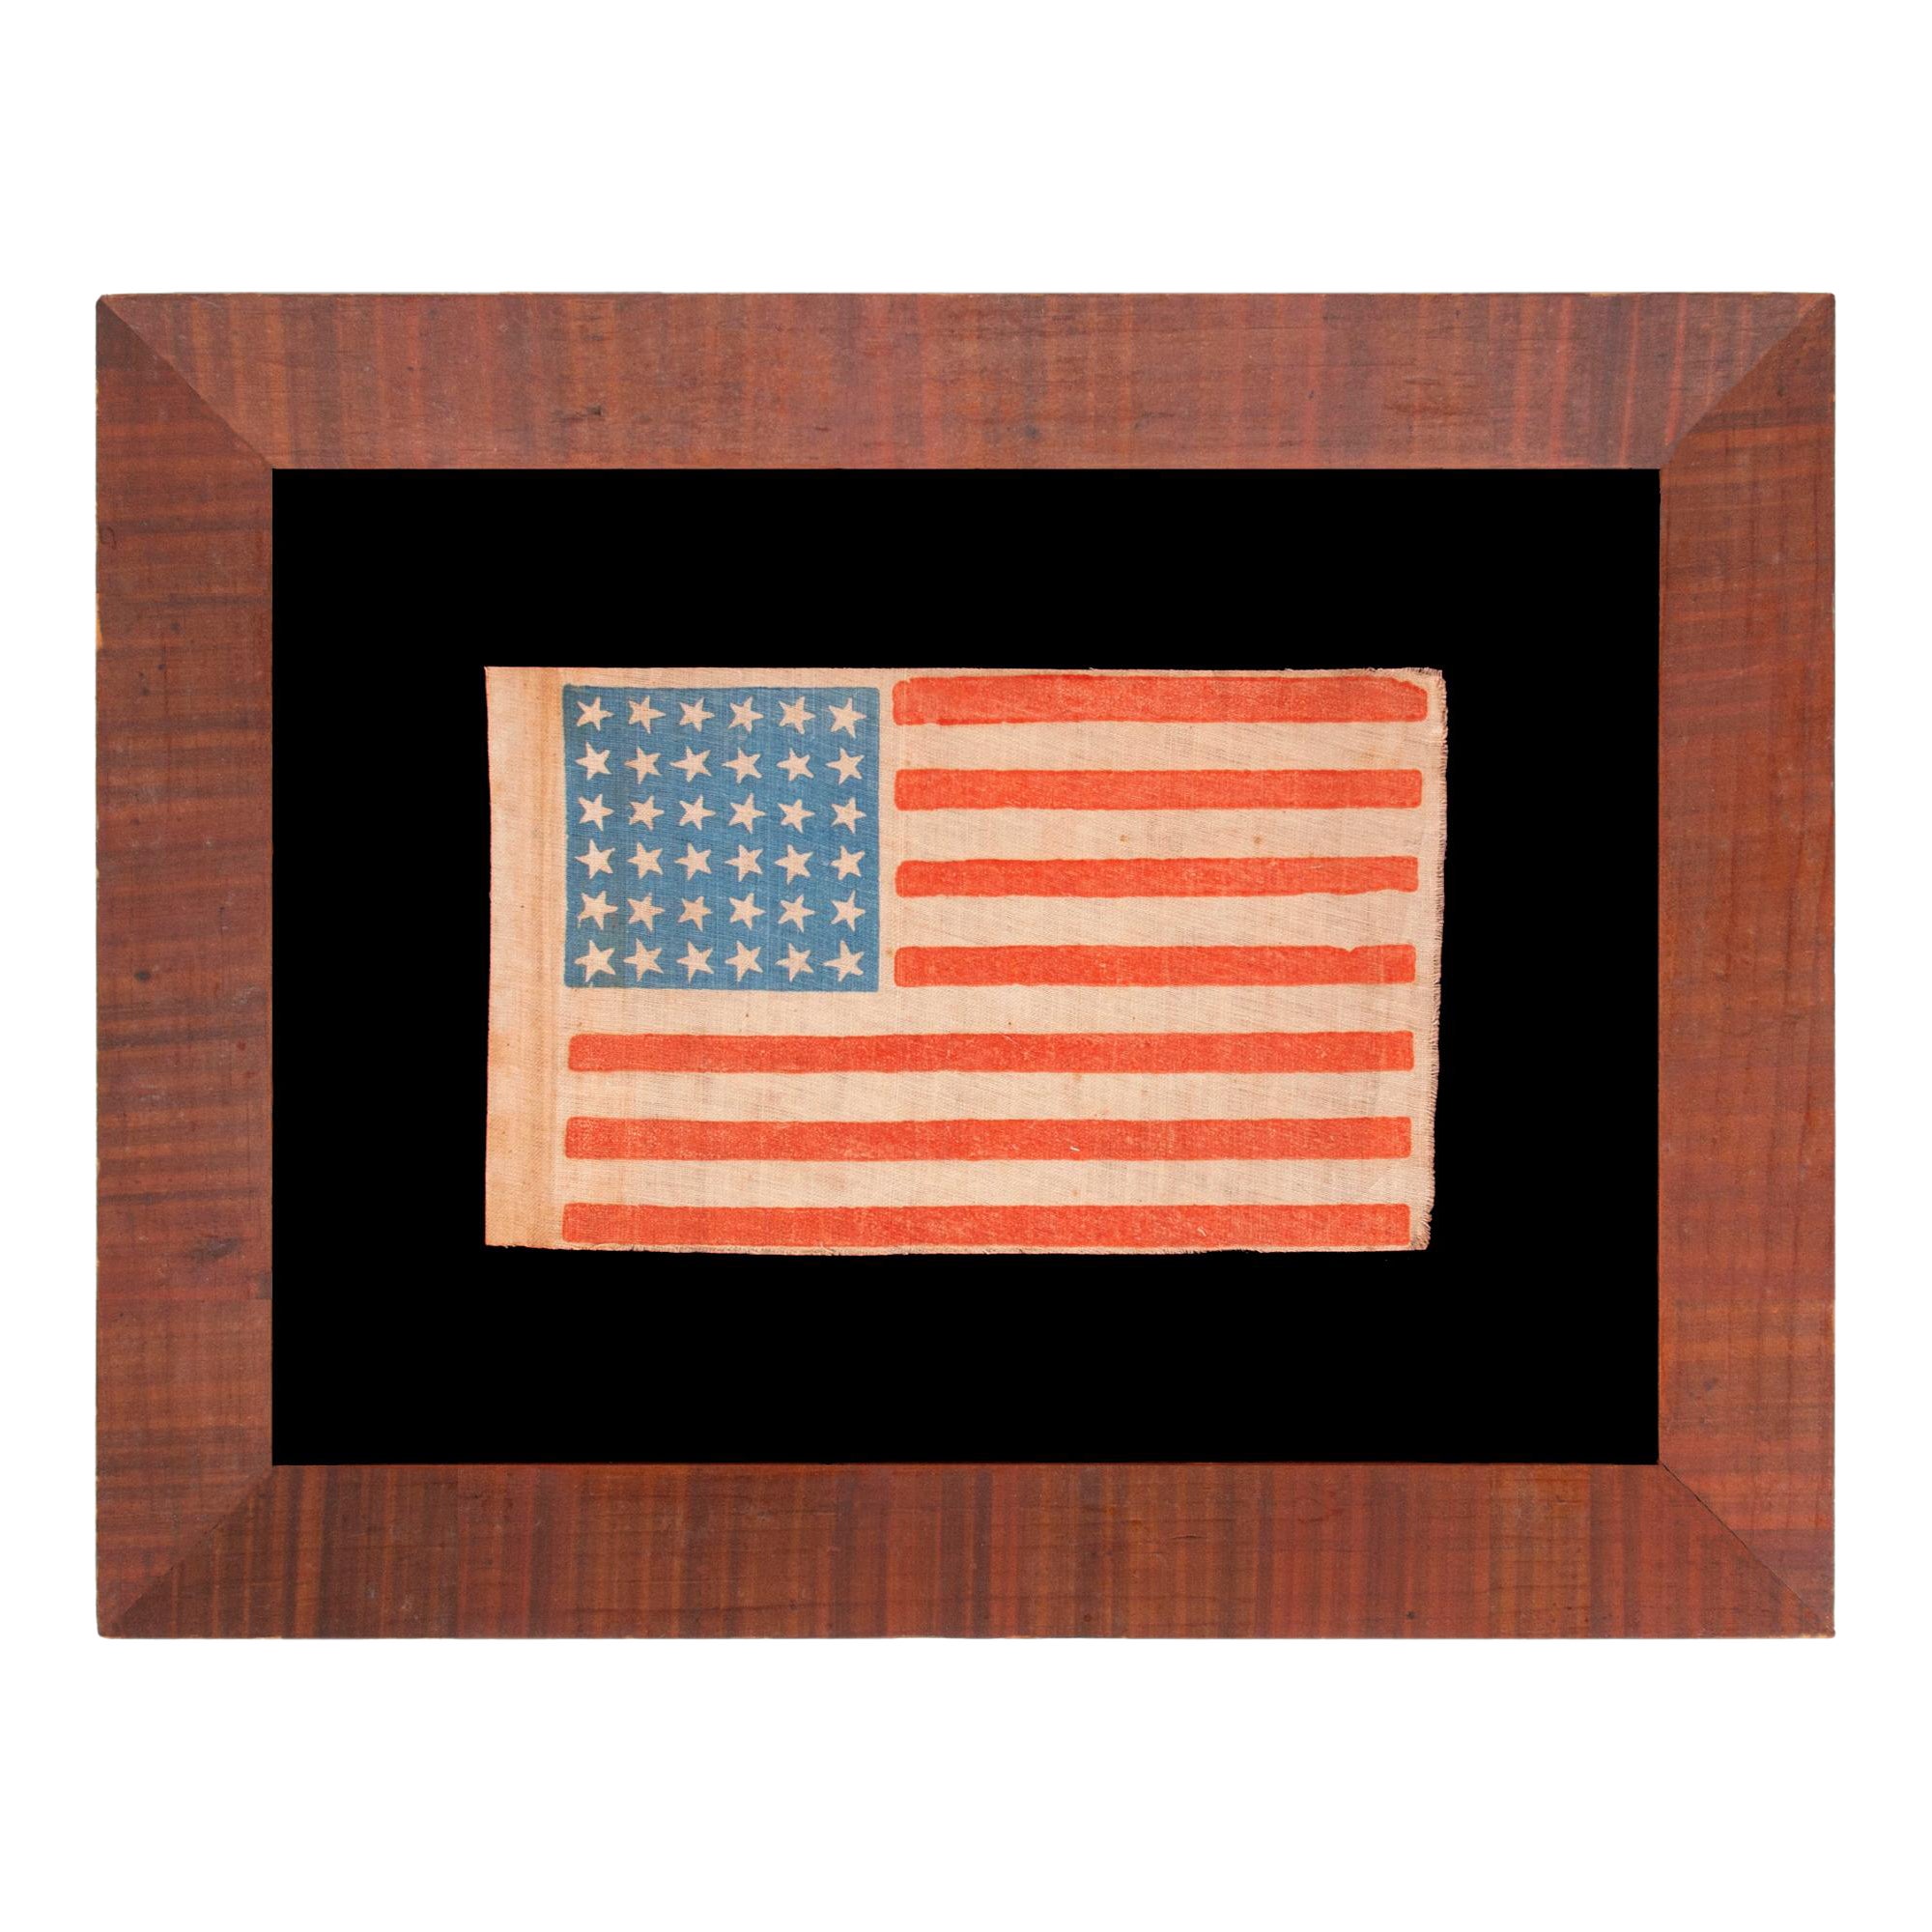 36 Star Antique American Parade Flag, with Canted Stars, ca 1864-1867